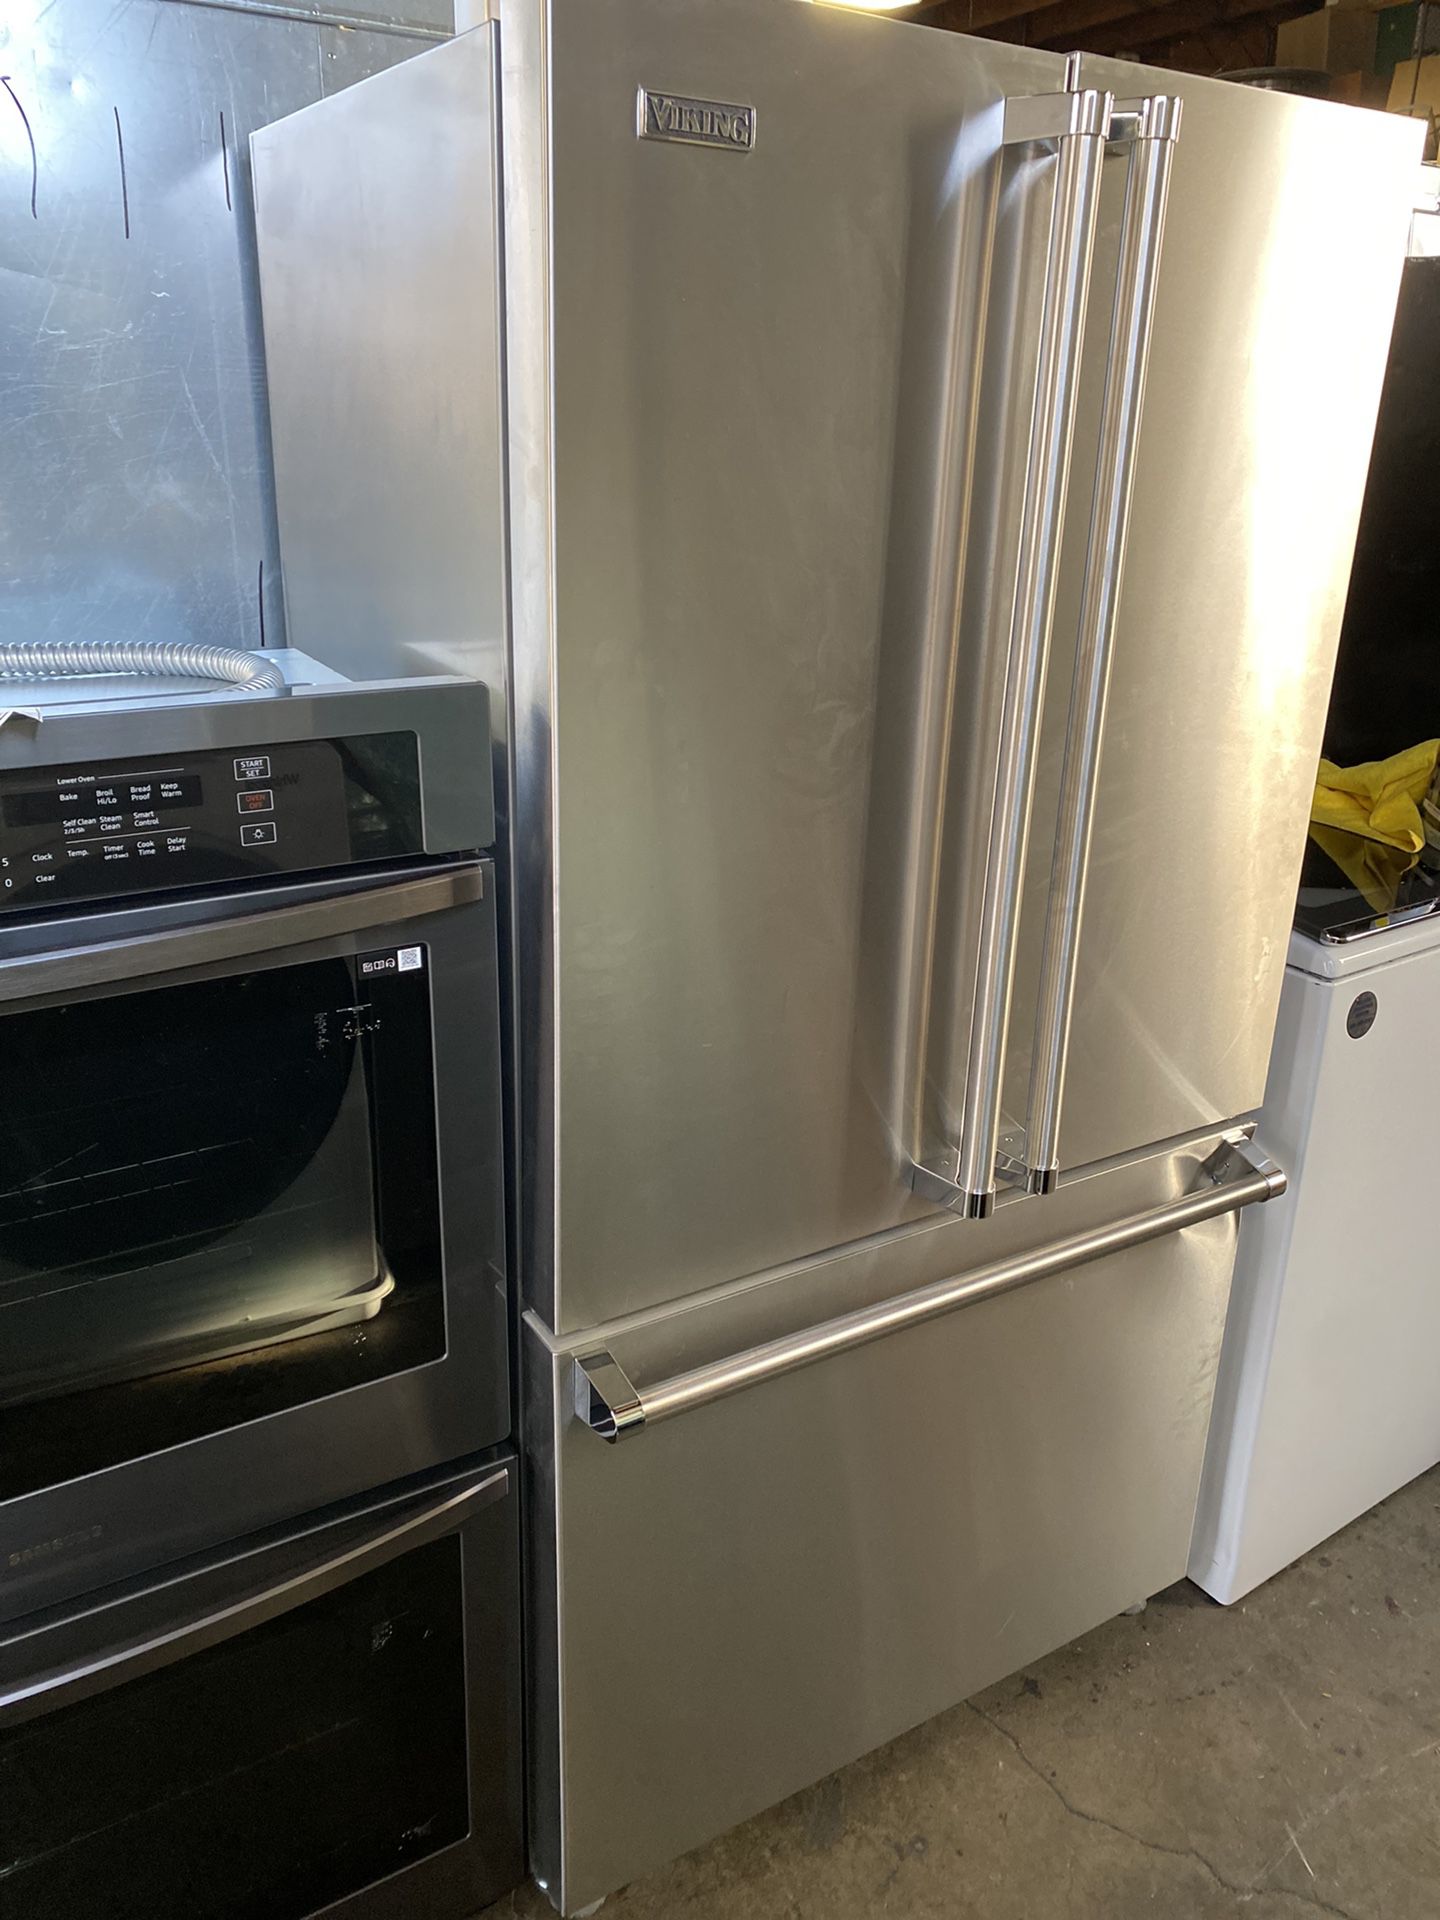 New Viking - French Door Refrigerator - Stainless Steel Model:RVFFR336SS. New out of the cardboard box  1Delivery and haul aw